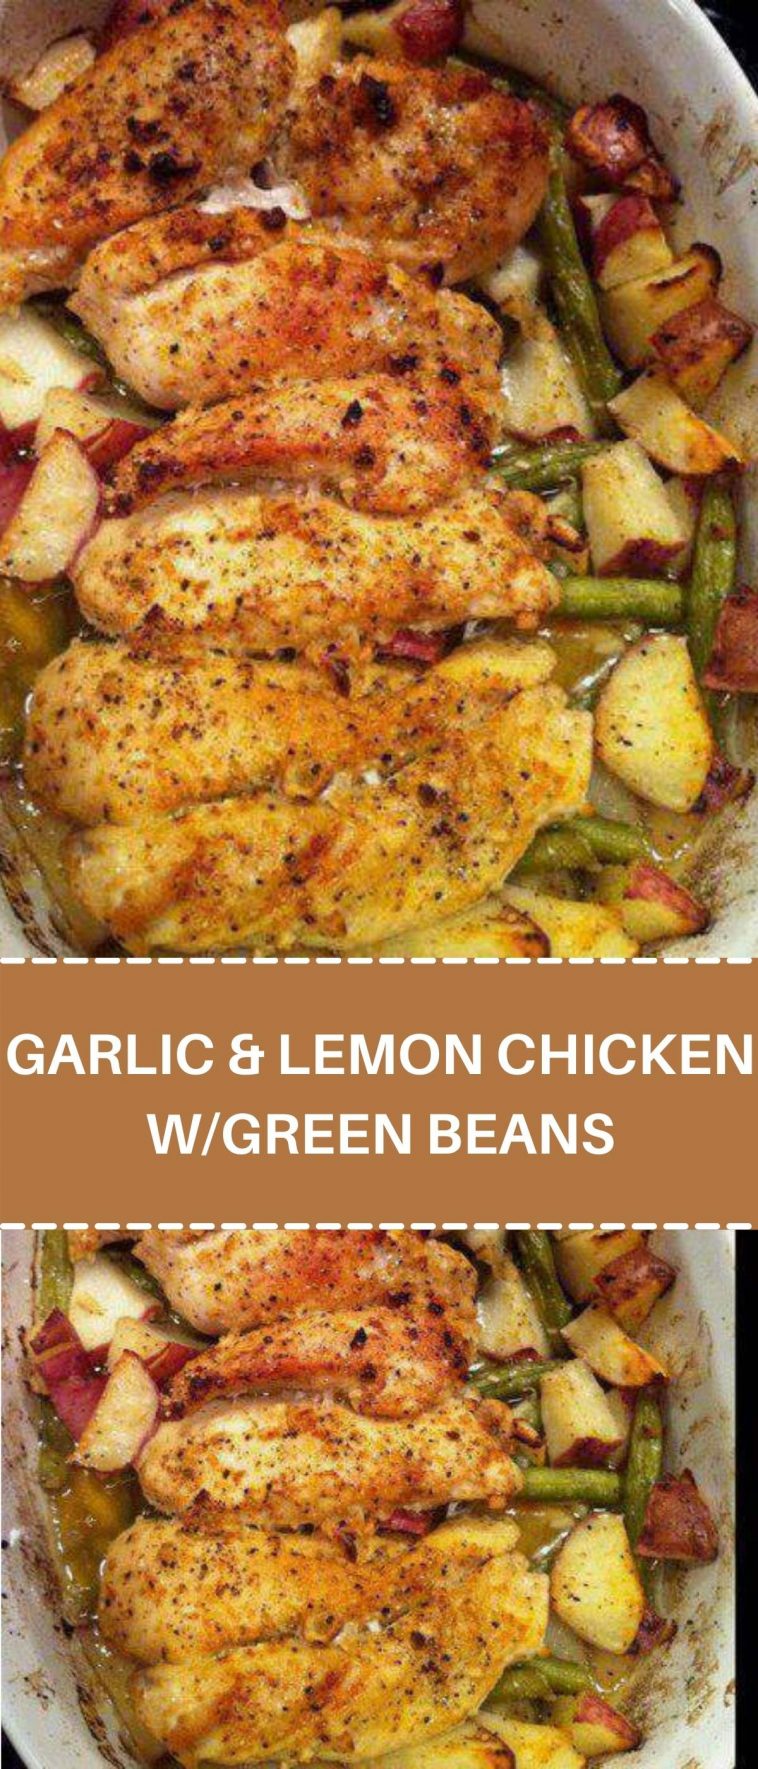 WOW!!!! THIS IS AWESOME!!!! GARLIC & LEMON CHICKEN W/GREEN BEANS